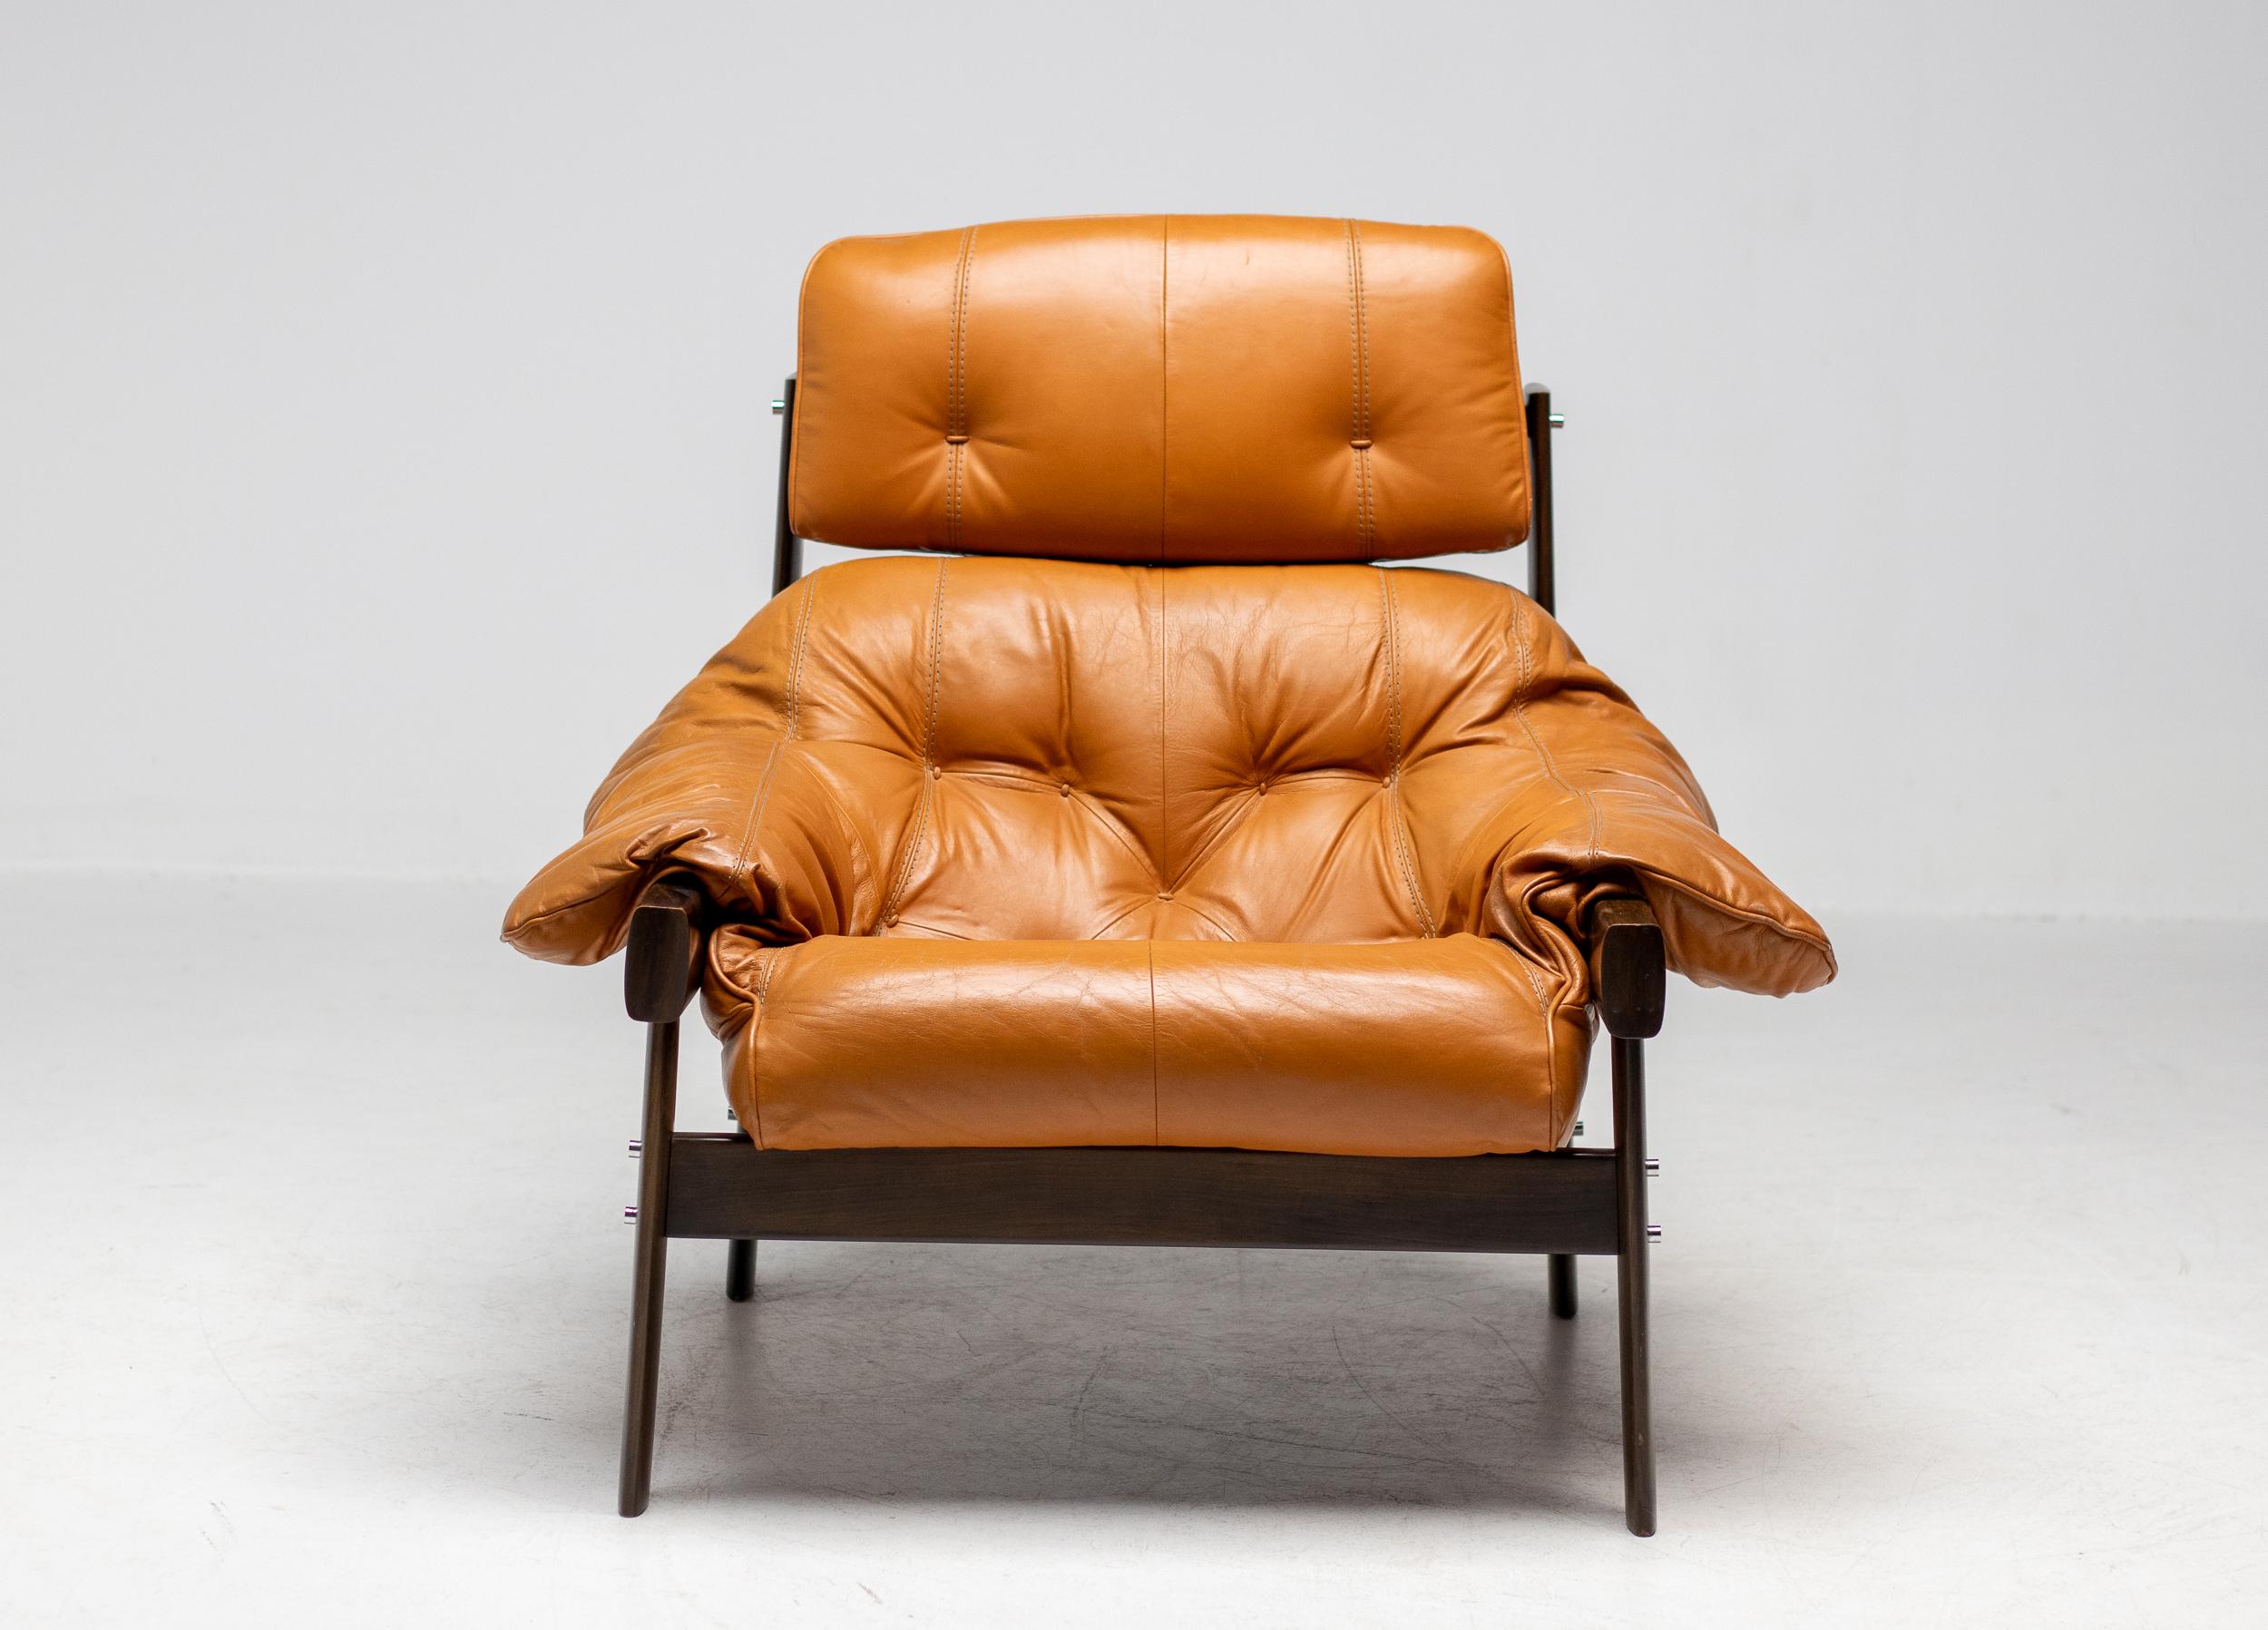 Percival Lafer MP-43 Lounge Chair Produced by Lafer MP in Brazil 3